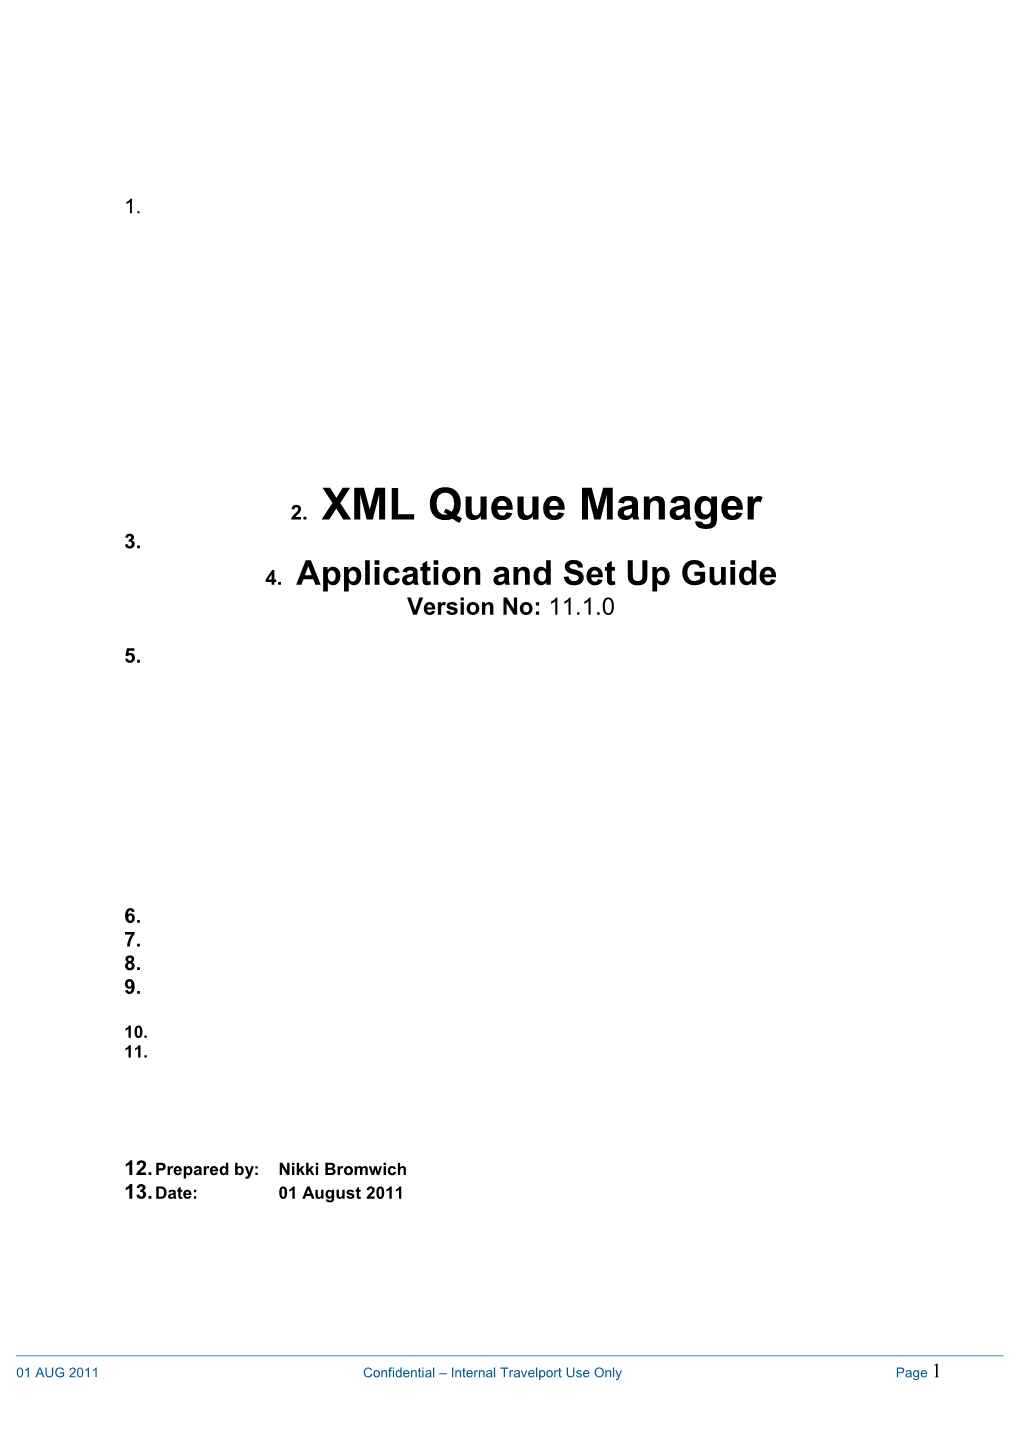 XML Queue Manager Installation and Setup Guide